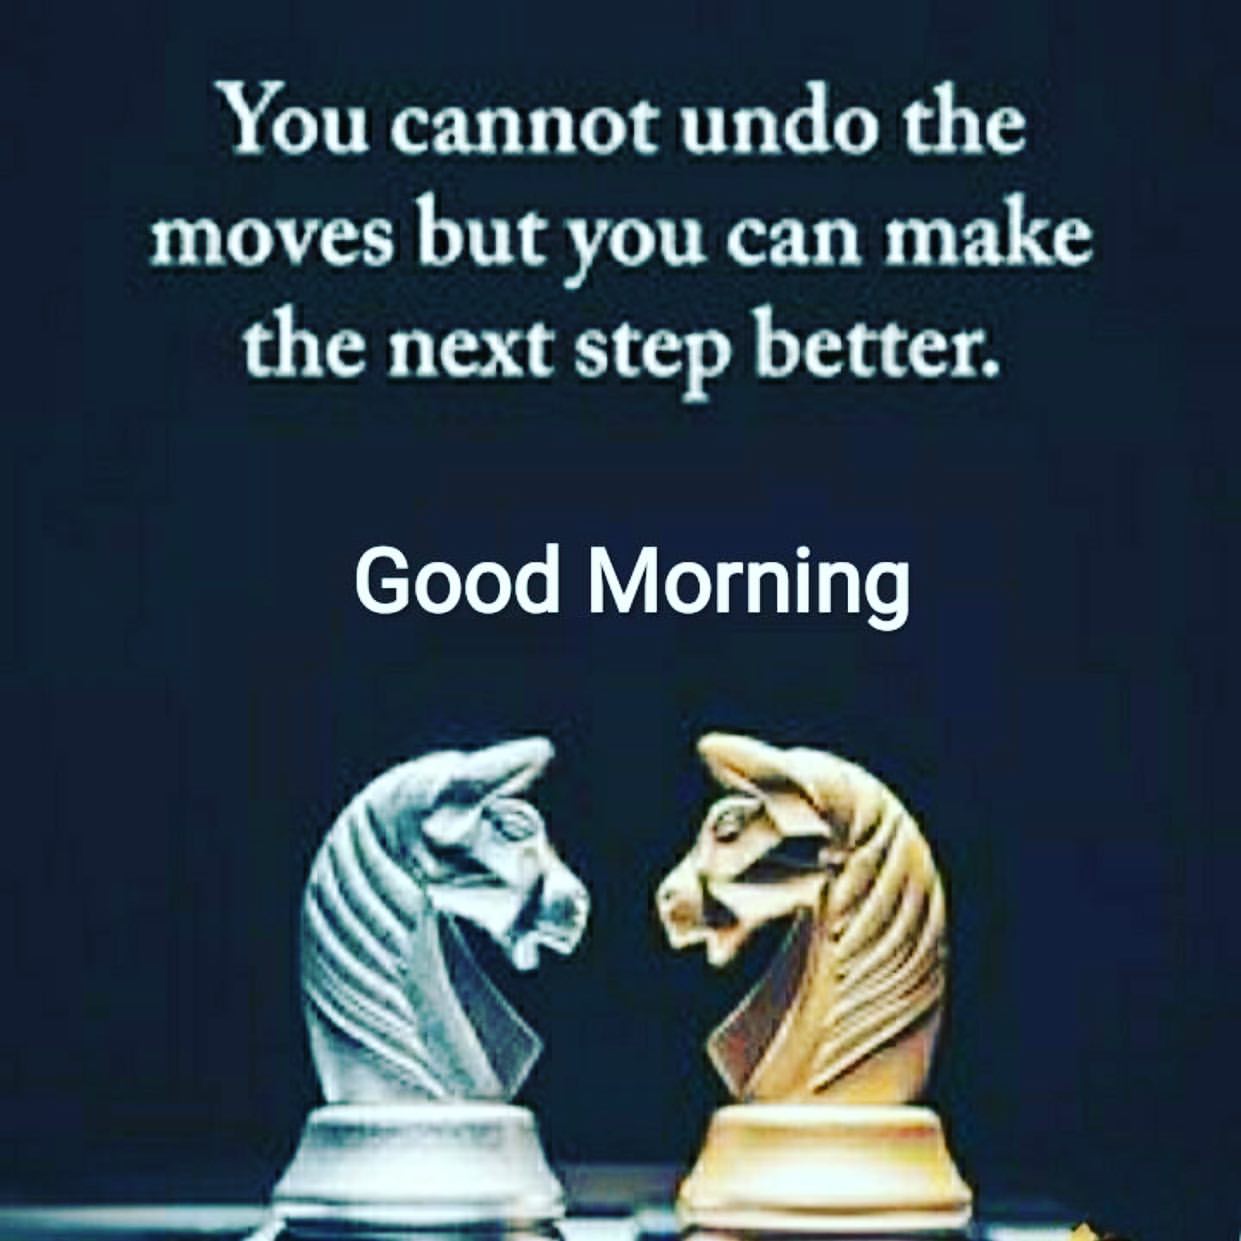 You cannot undo the moves but you can make the next step better. Good Morning.